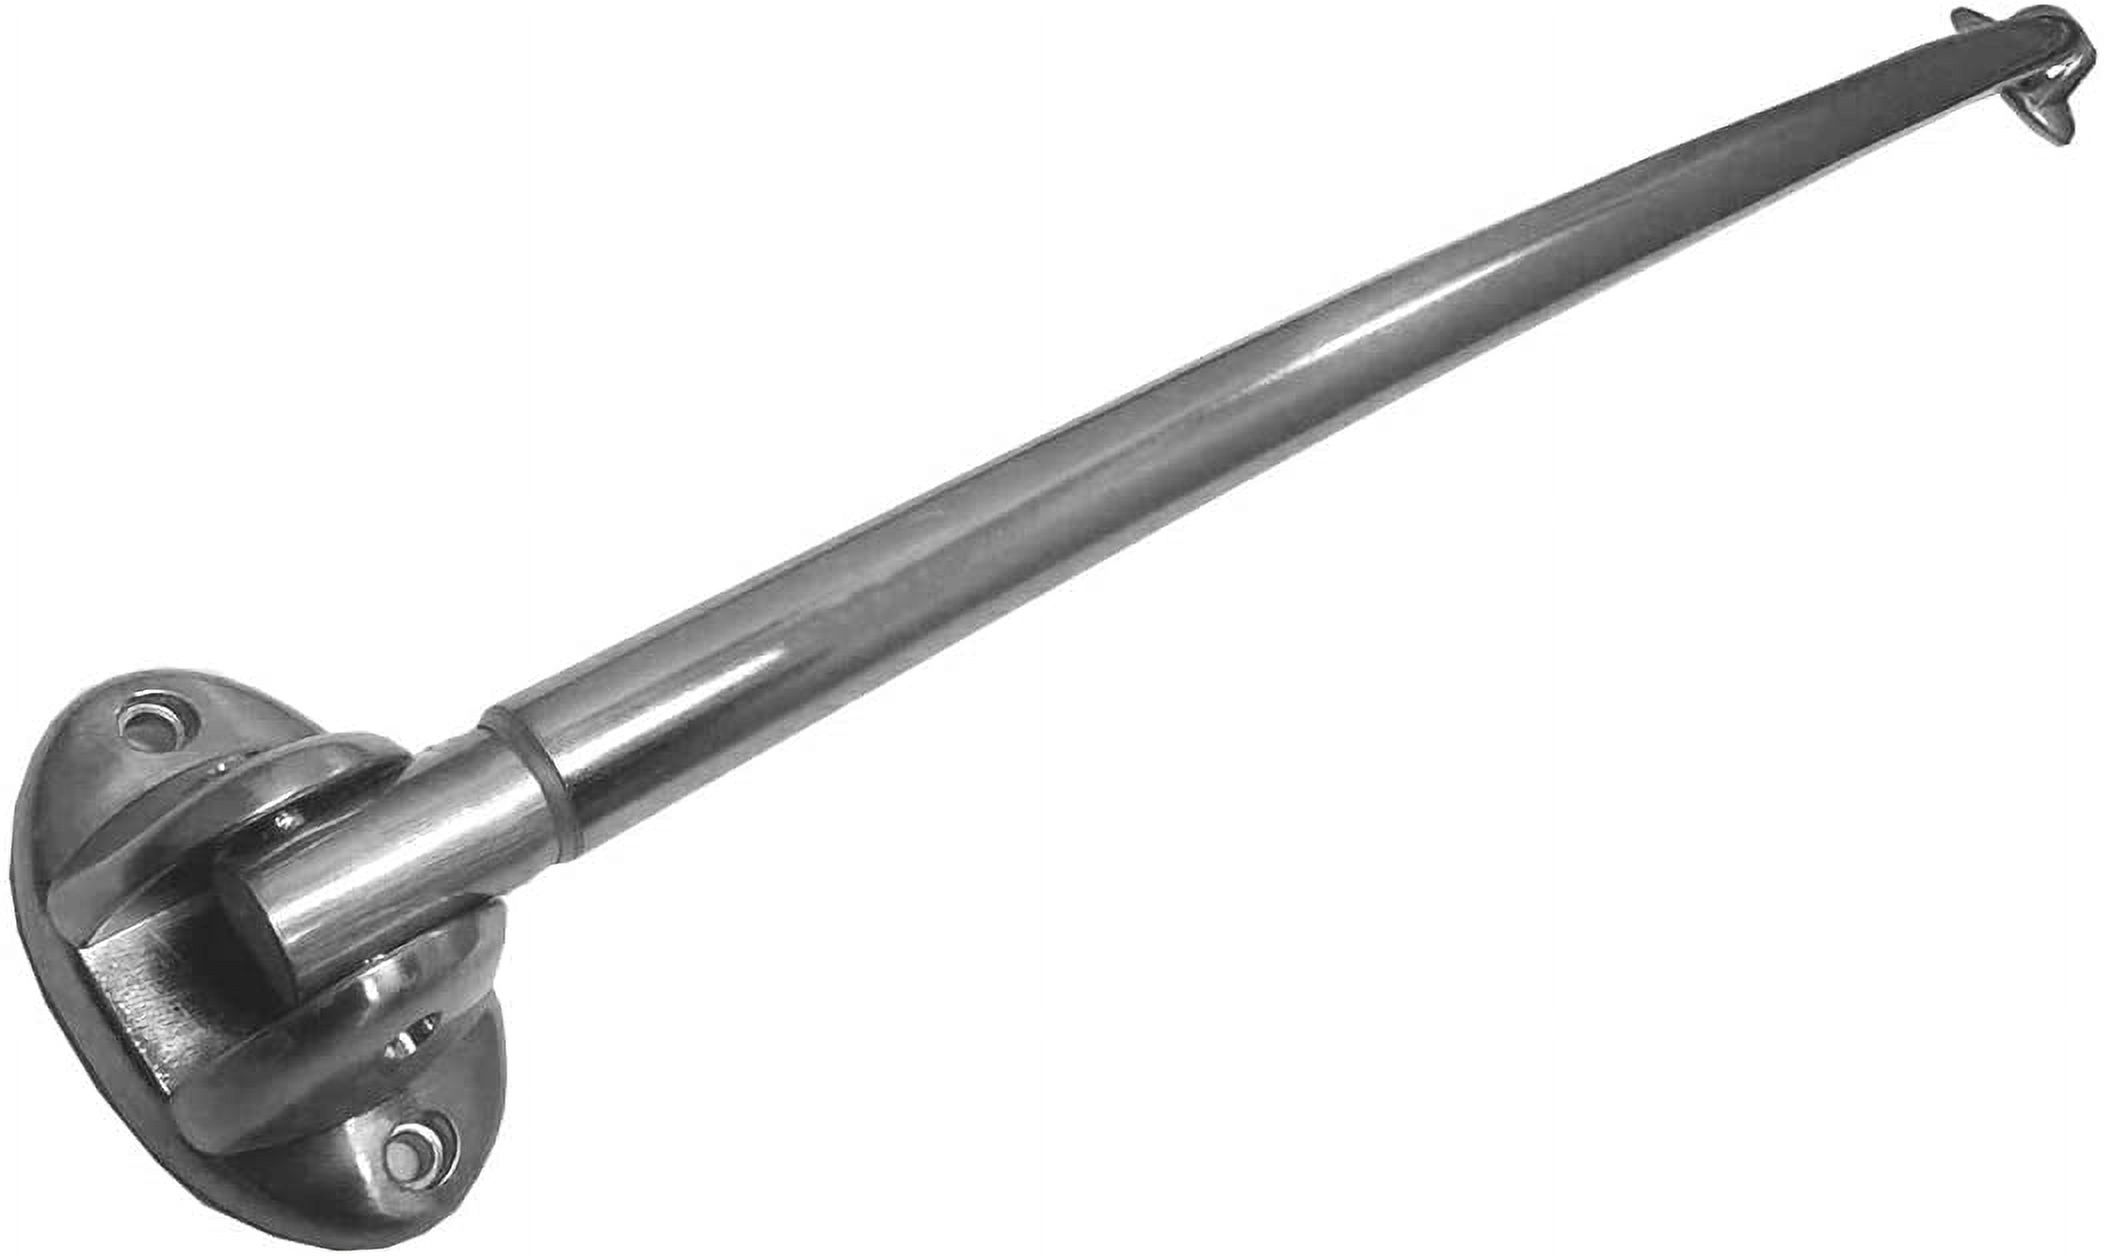 Excell 42 in Adjustable Curved Shower Curtain Rod, Nickel - image 5 of 5